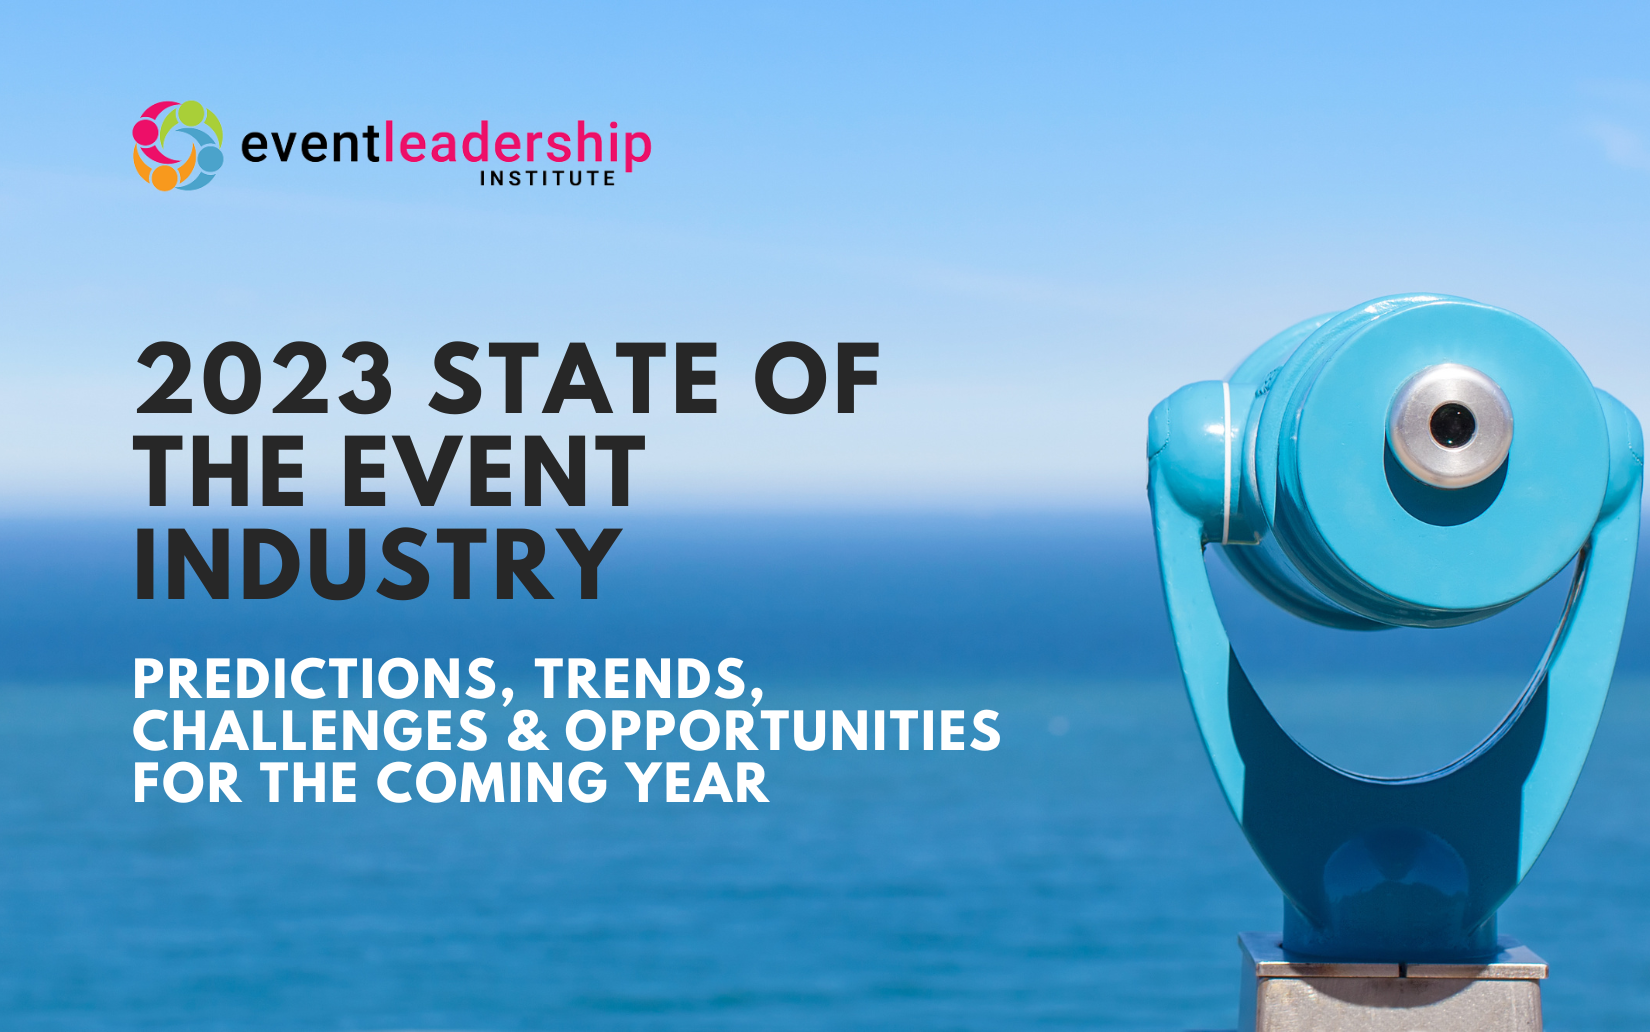 Webinar: 2023 State of the Event Industry: Predictions, Trends, Challenges & Opportunities for the Coming Year